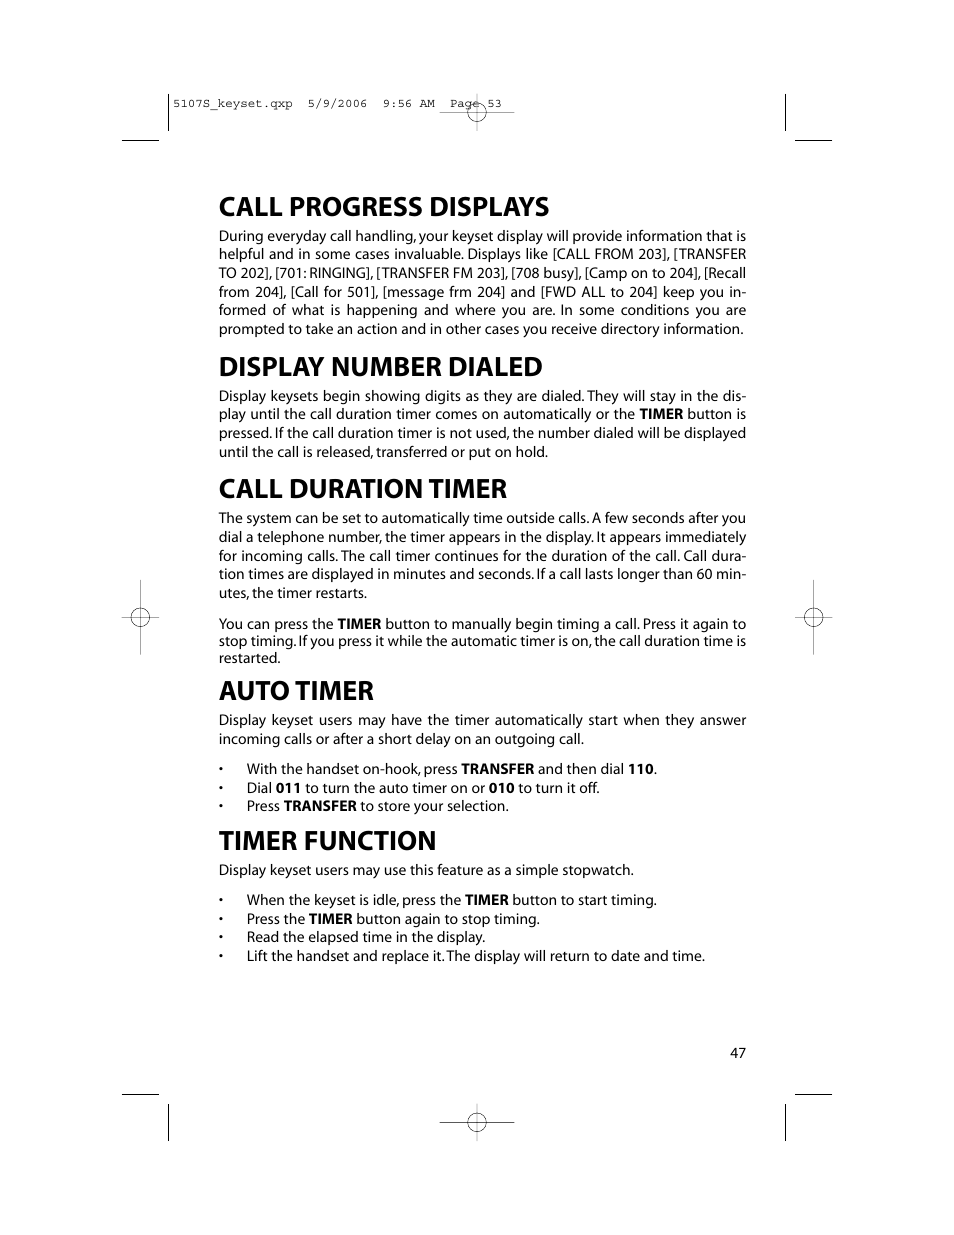 Call progress displays, Display number dialed, Call duration timer | Auto timer, Timer function | Samsung ITP-5107SIP User Manual | Page 54 / 86